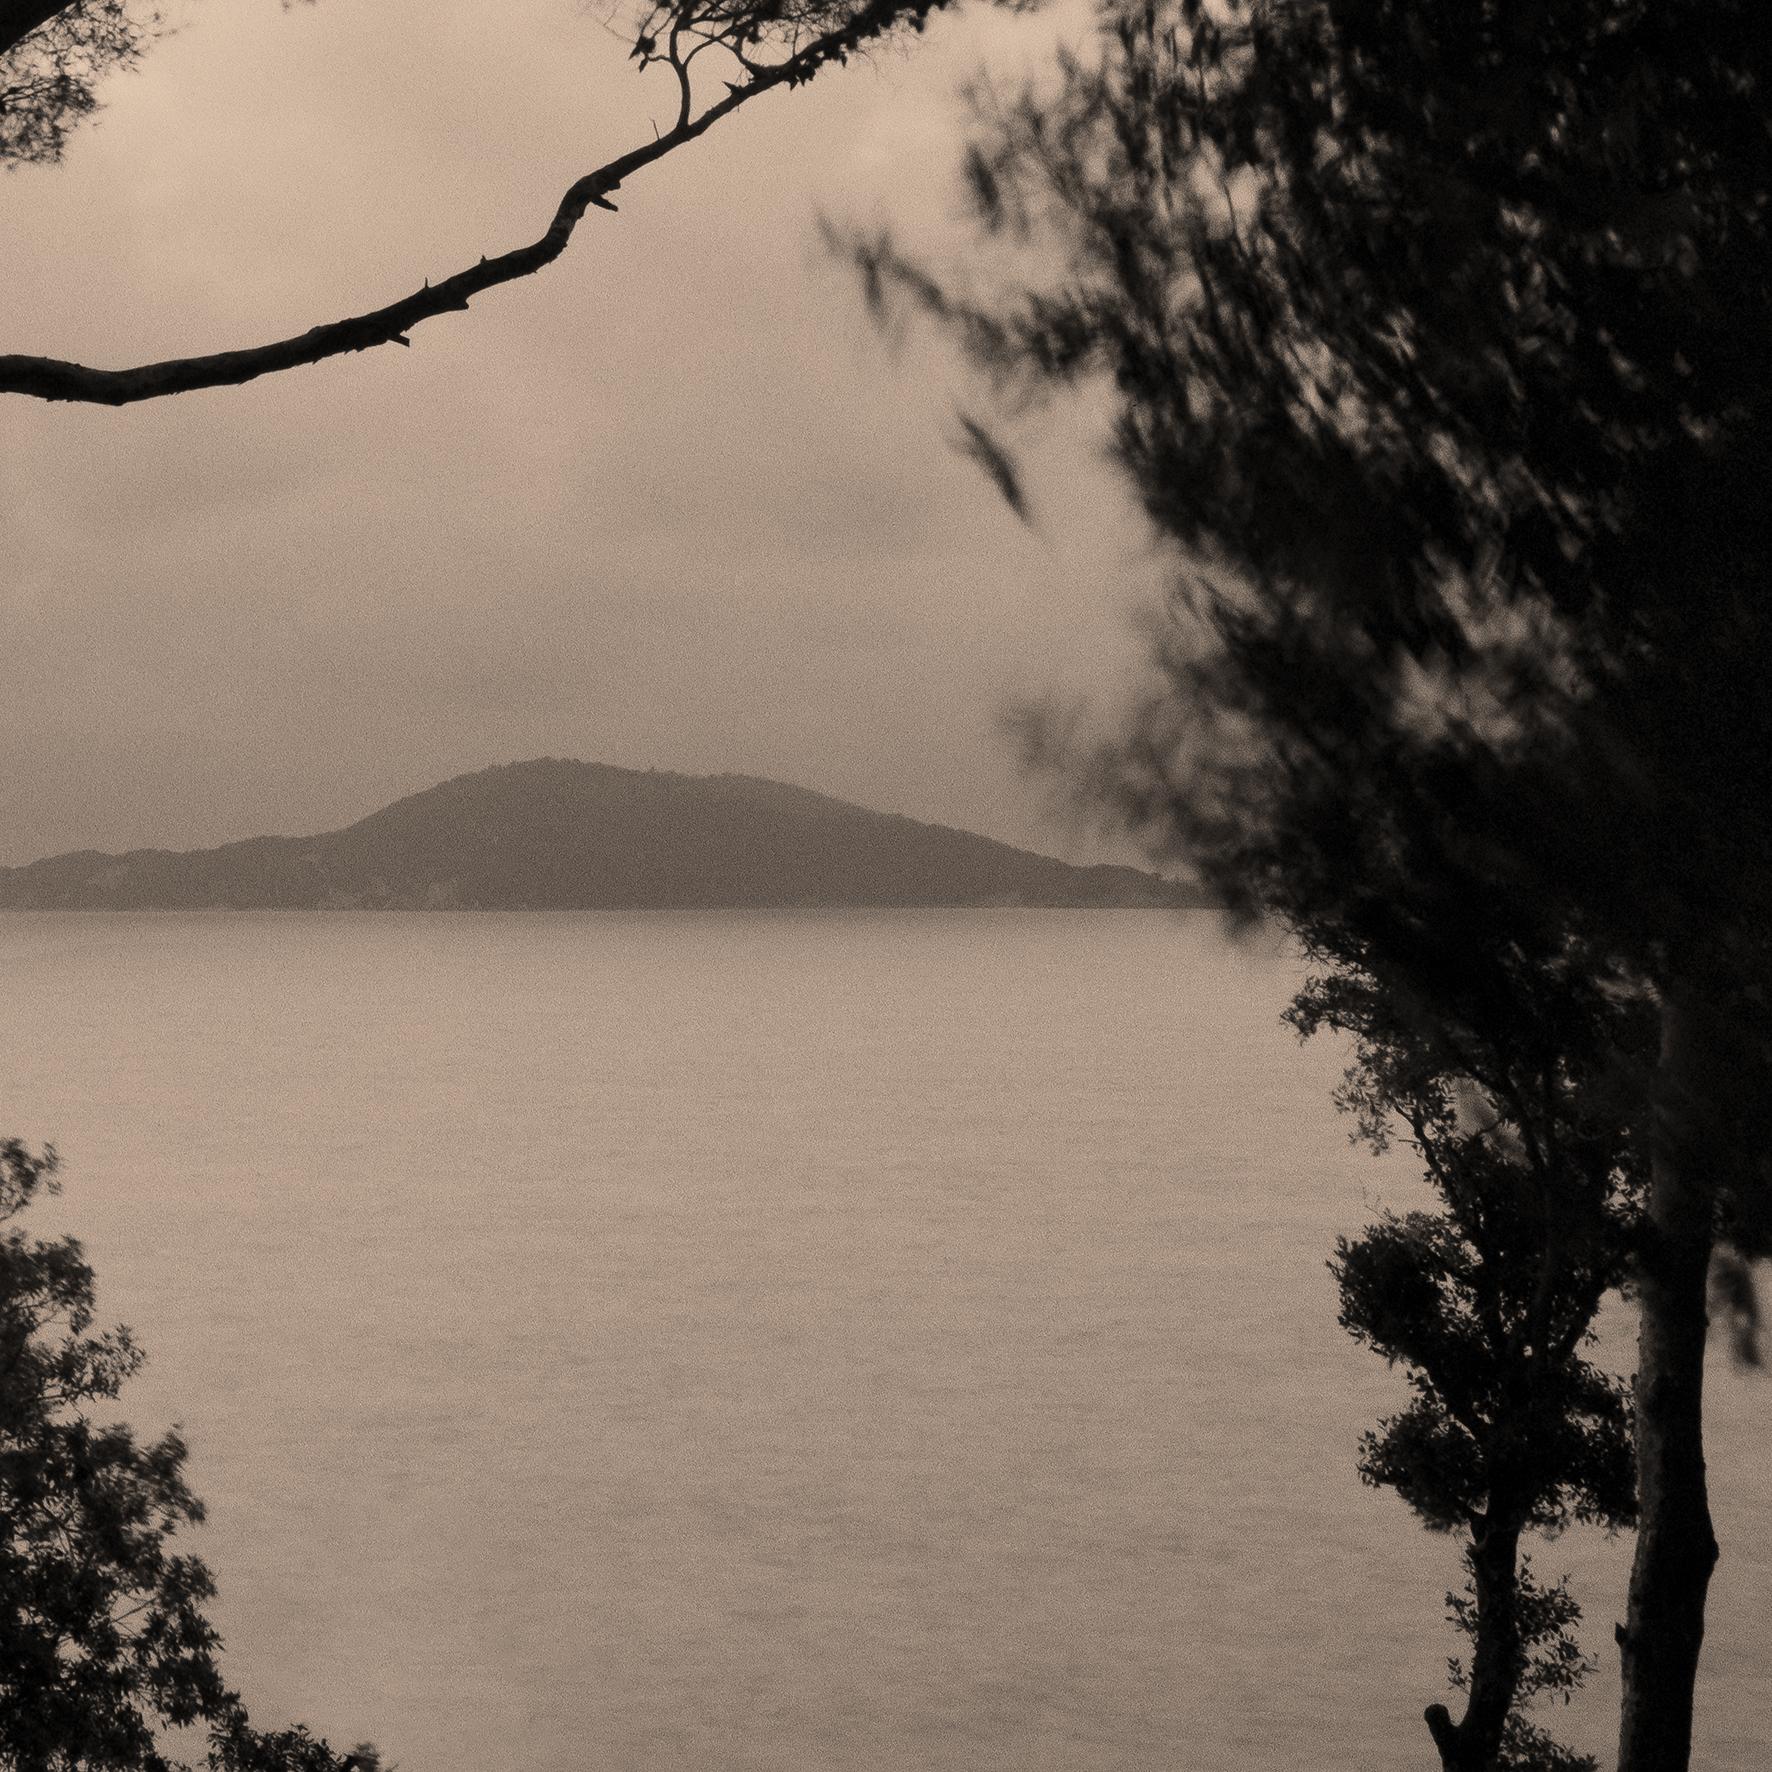 Currents - Italian Riviera landscape photography 175 x 100cm, Limited Edition 5 - Contemporary Photograph by Ugne Pouwell